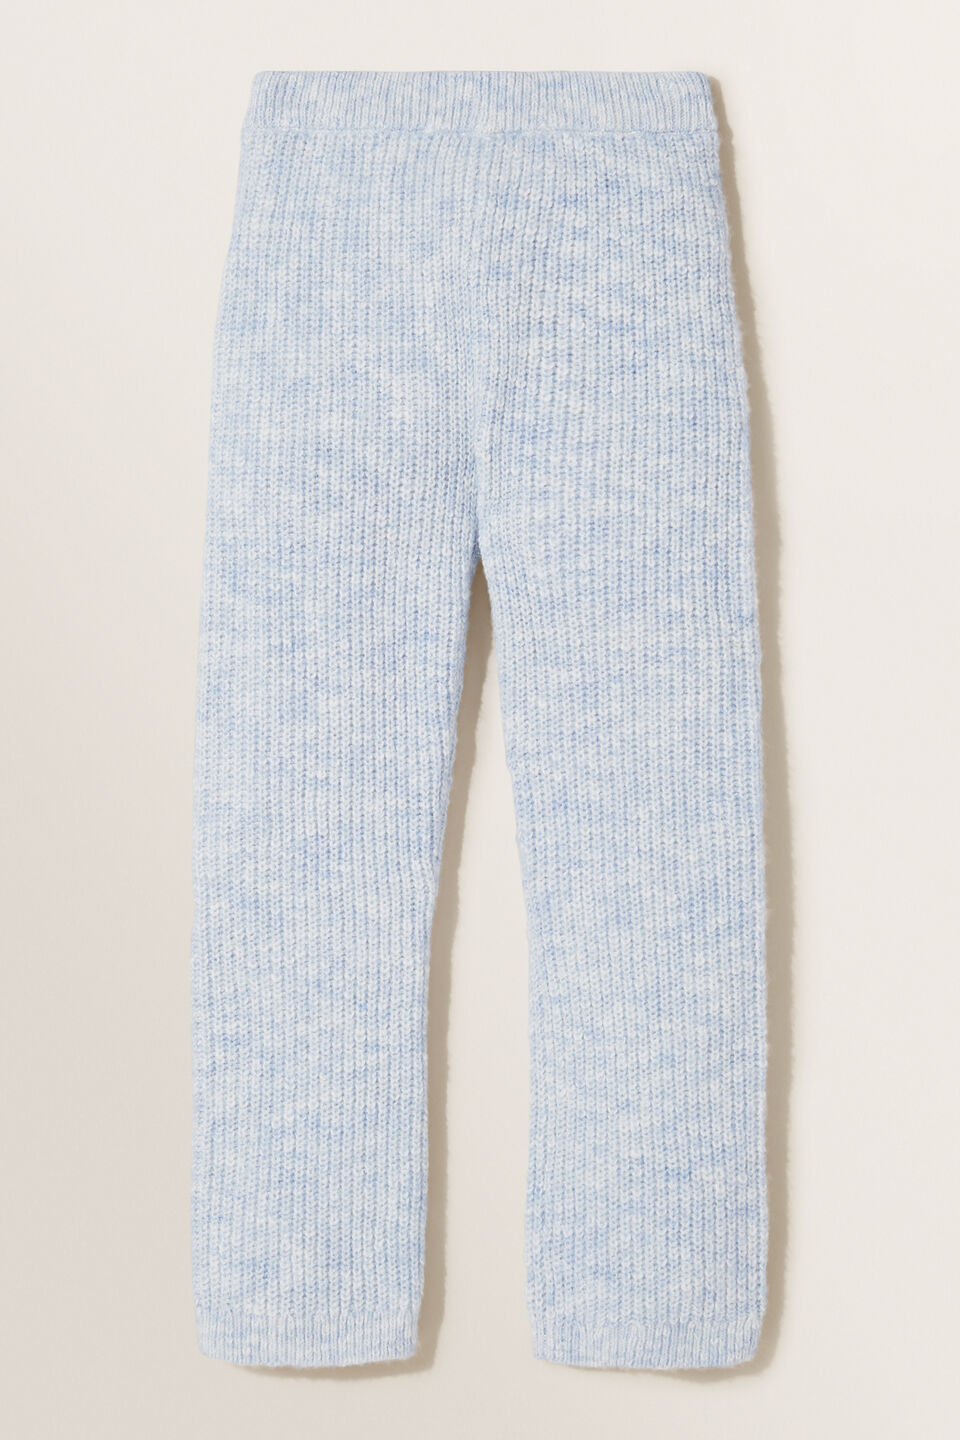 Speckle Knit Trousers  Bluebelle Marle